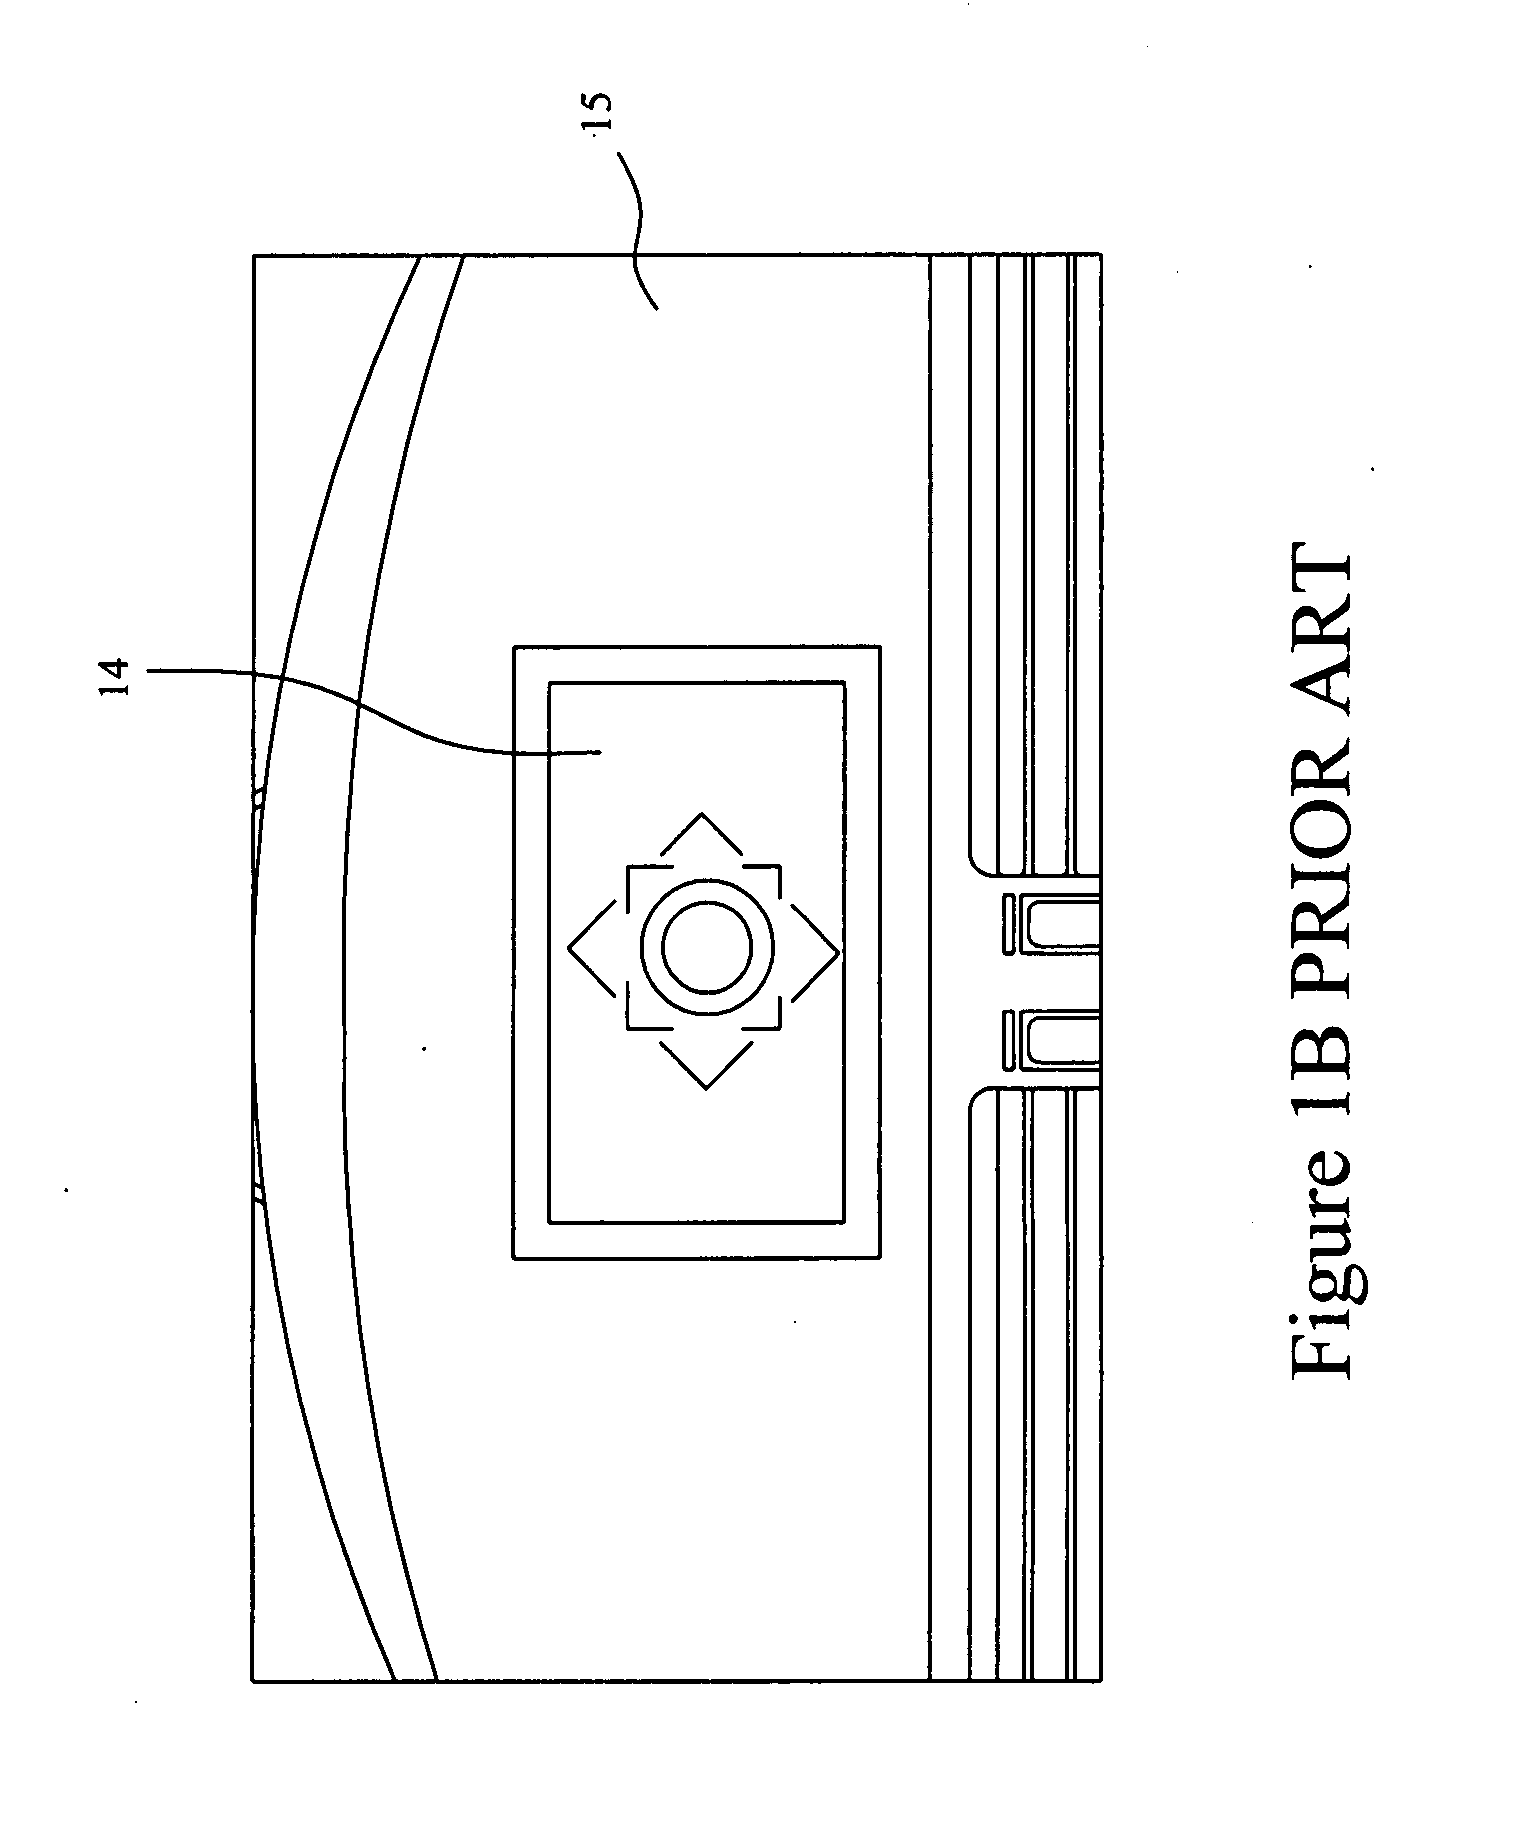 Integrated vehicle control interface and module